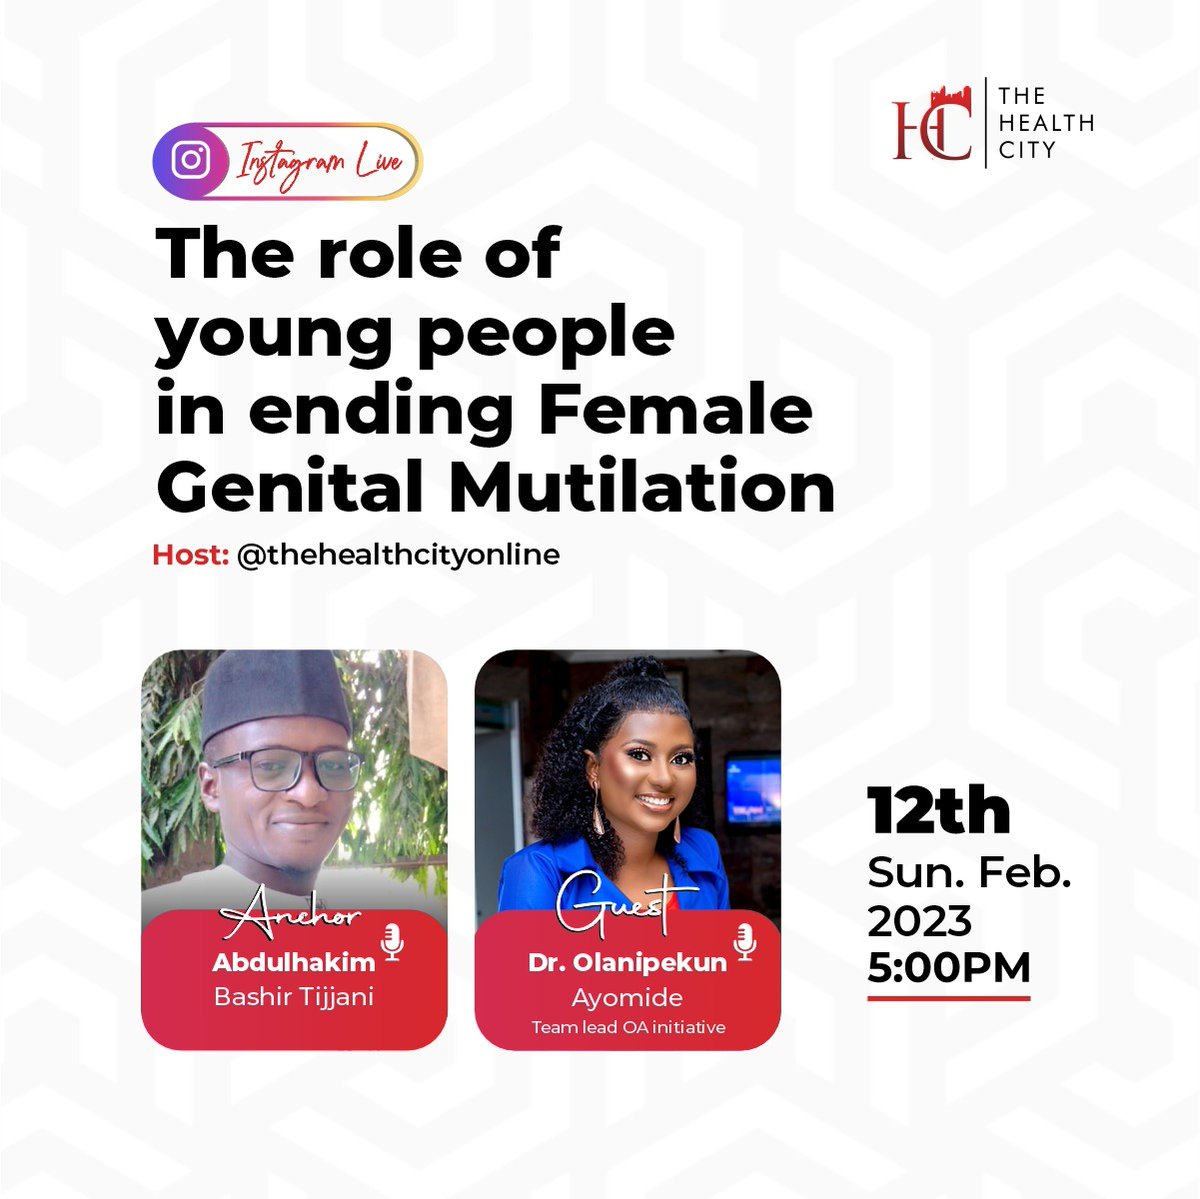 We'll be hosting a live session on Instagram tomorrow. Let's talk about how young people can contribute to ending Female Genital Mutilation.

#healthcity #EndFGM #stopthecut #reproductivehealth